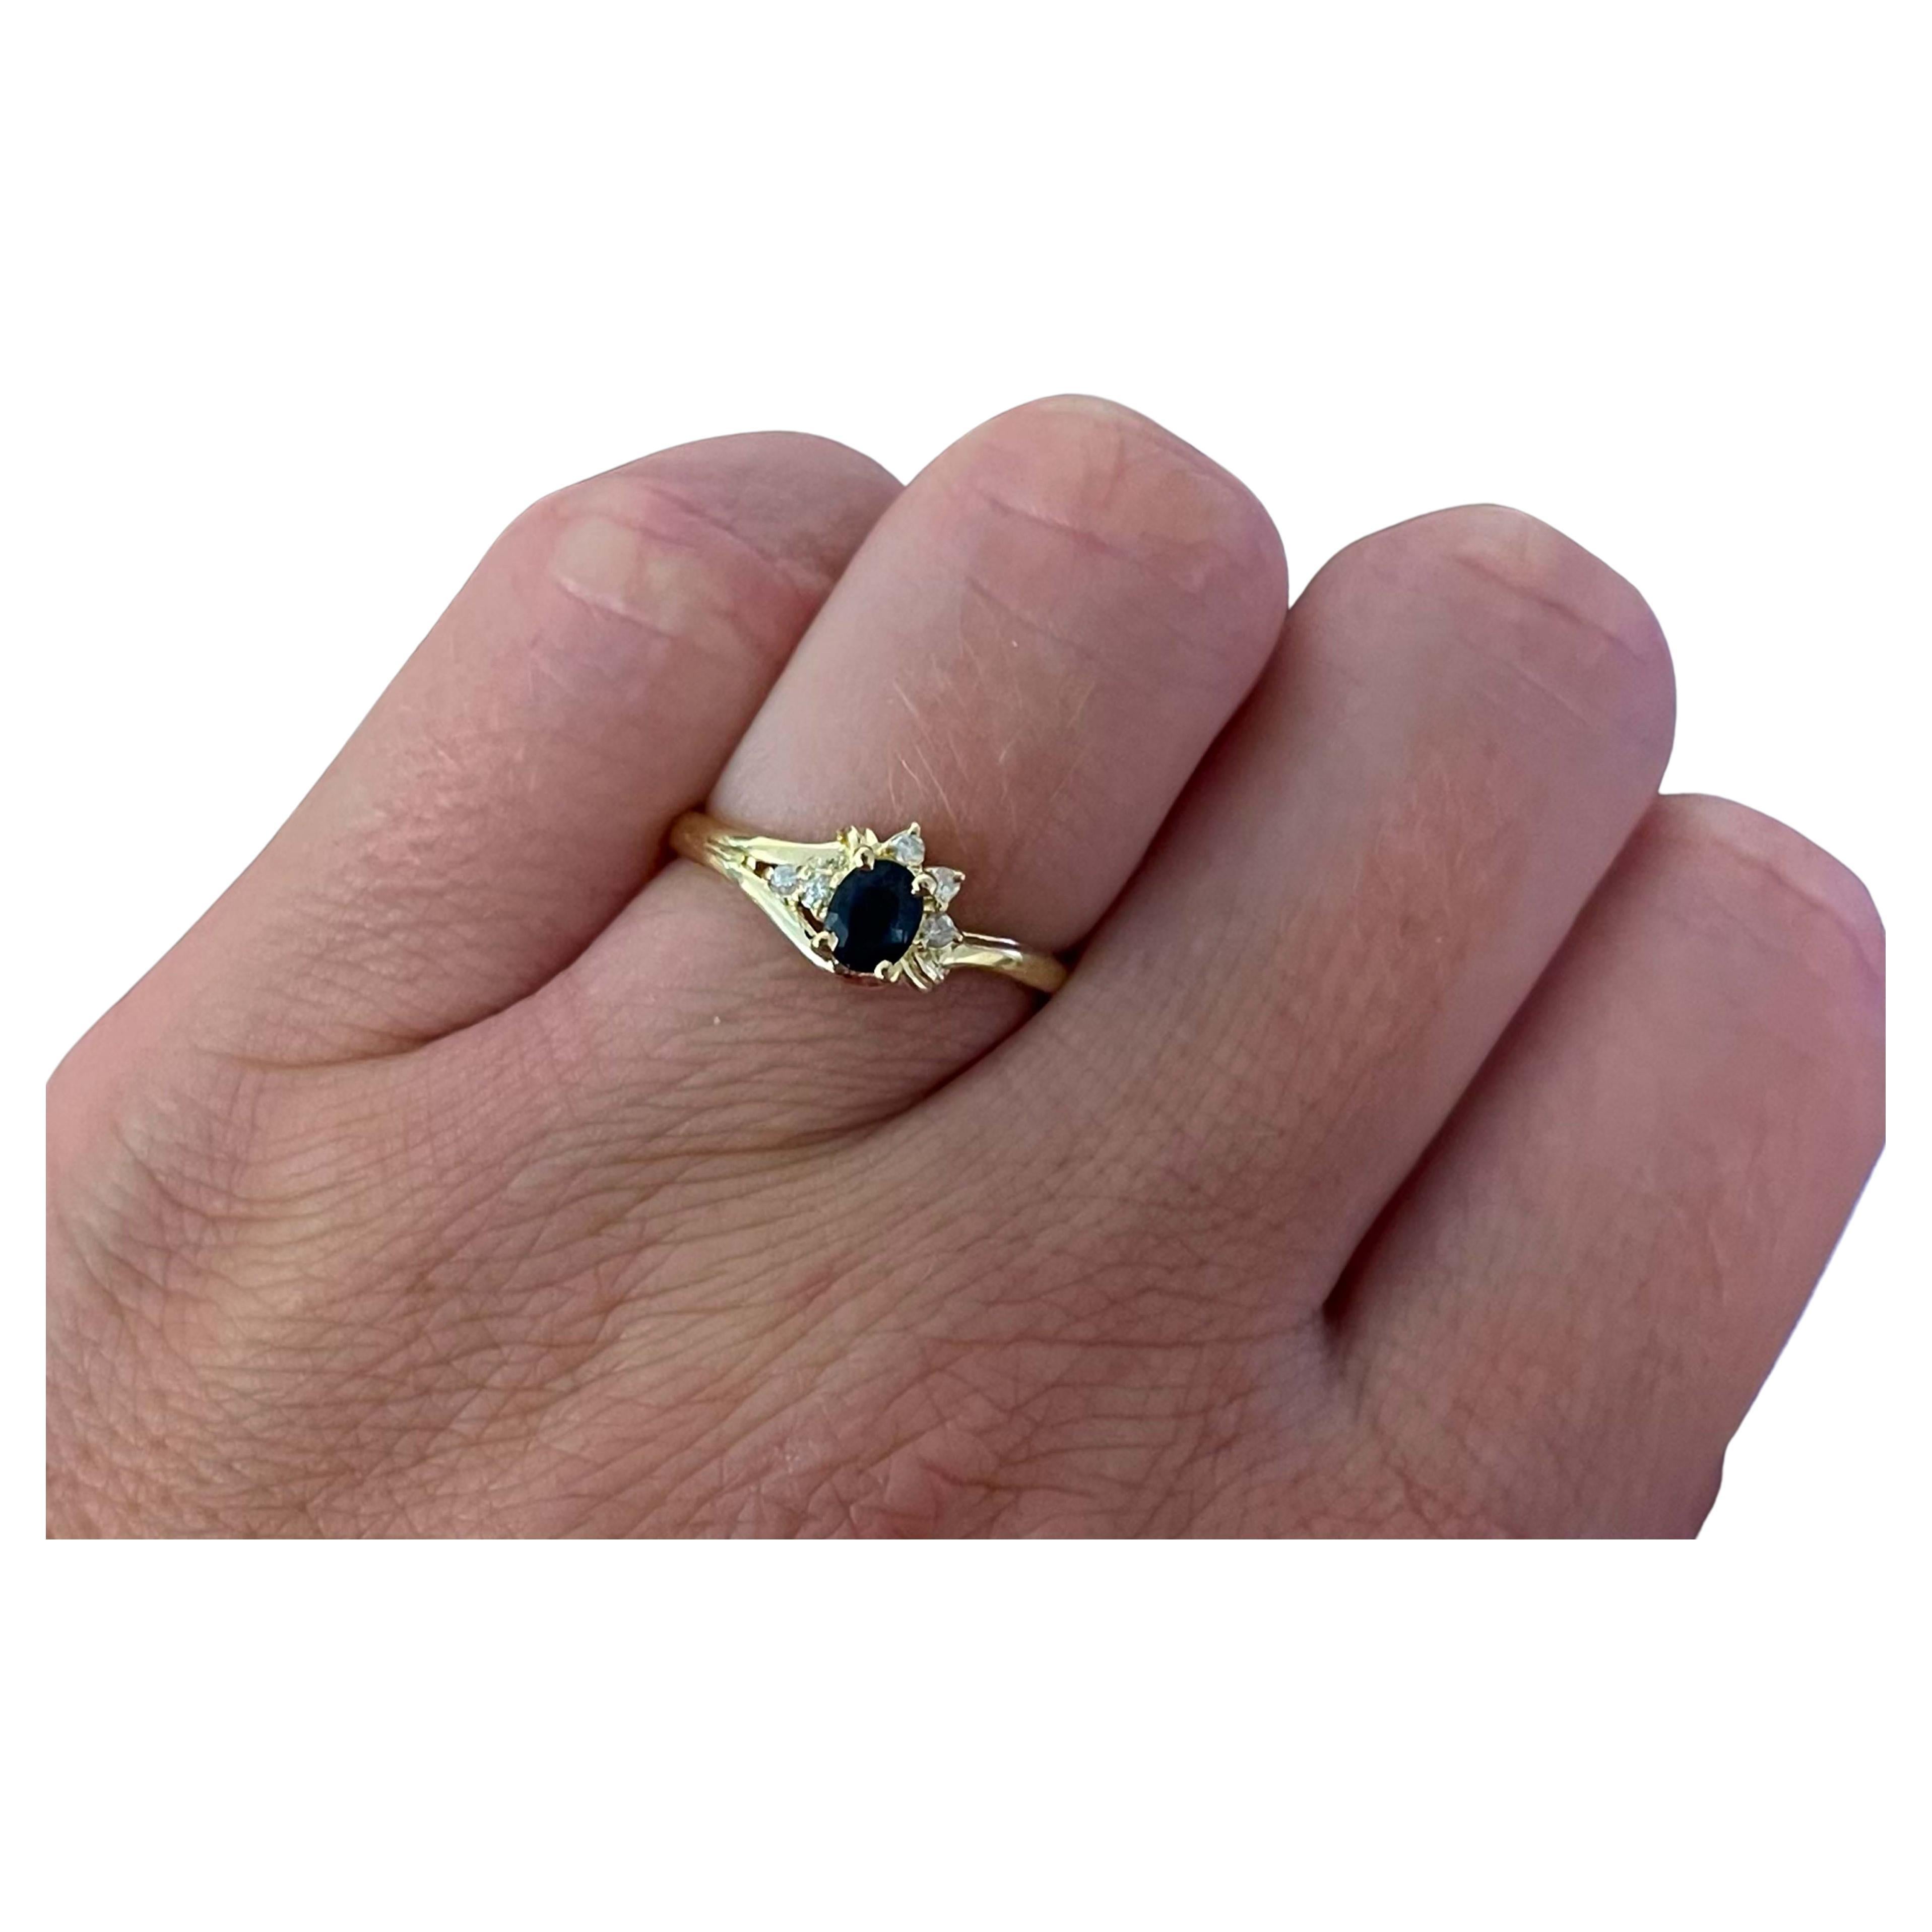 Item Specifications:

Metal: 14K Yellow Gold

Style: Statement Ring

Ring Size: 6.75 (resizing available for a fee)

Total Weight: 2.0 Grams

Ring Height: 7.61 mm

Gemstone Specifications:

Gemstone: 1 blue sapphire

Shape: oval

Sapphire